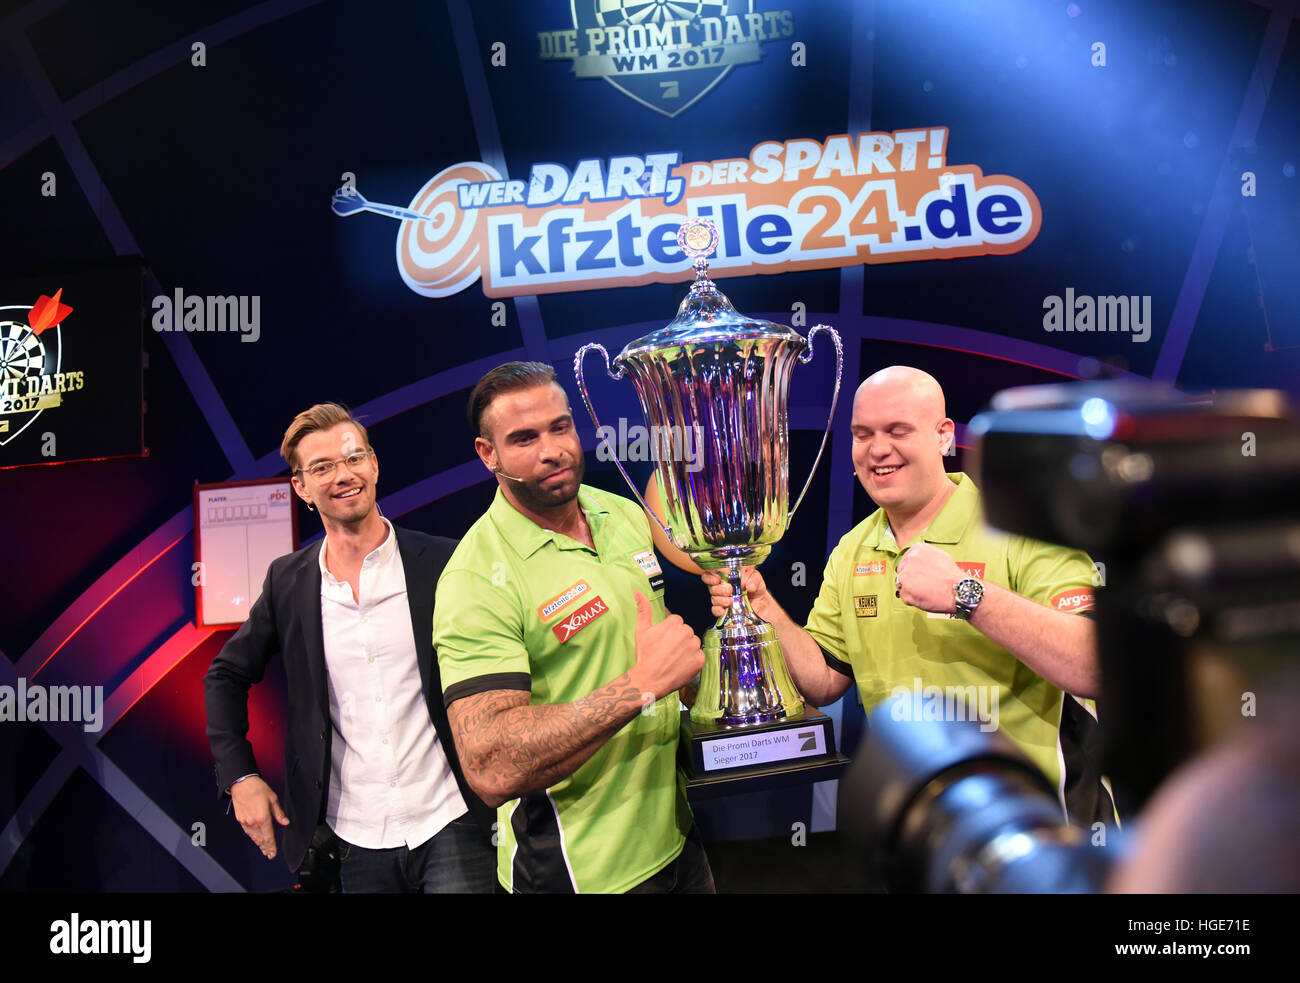 Star Time Wiese (M) and Dutch Darts world champion Michael van Gerwen (m-R) celebrate their win with a trophy during the 'Promi-Darts-WM' event Duesseldorf, Germany, 07 January 2017. To the